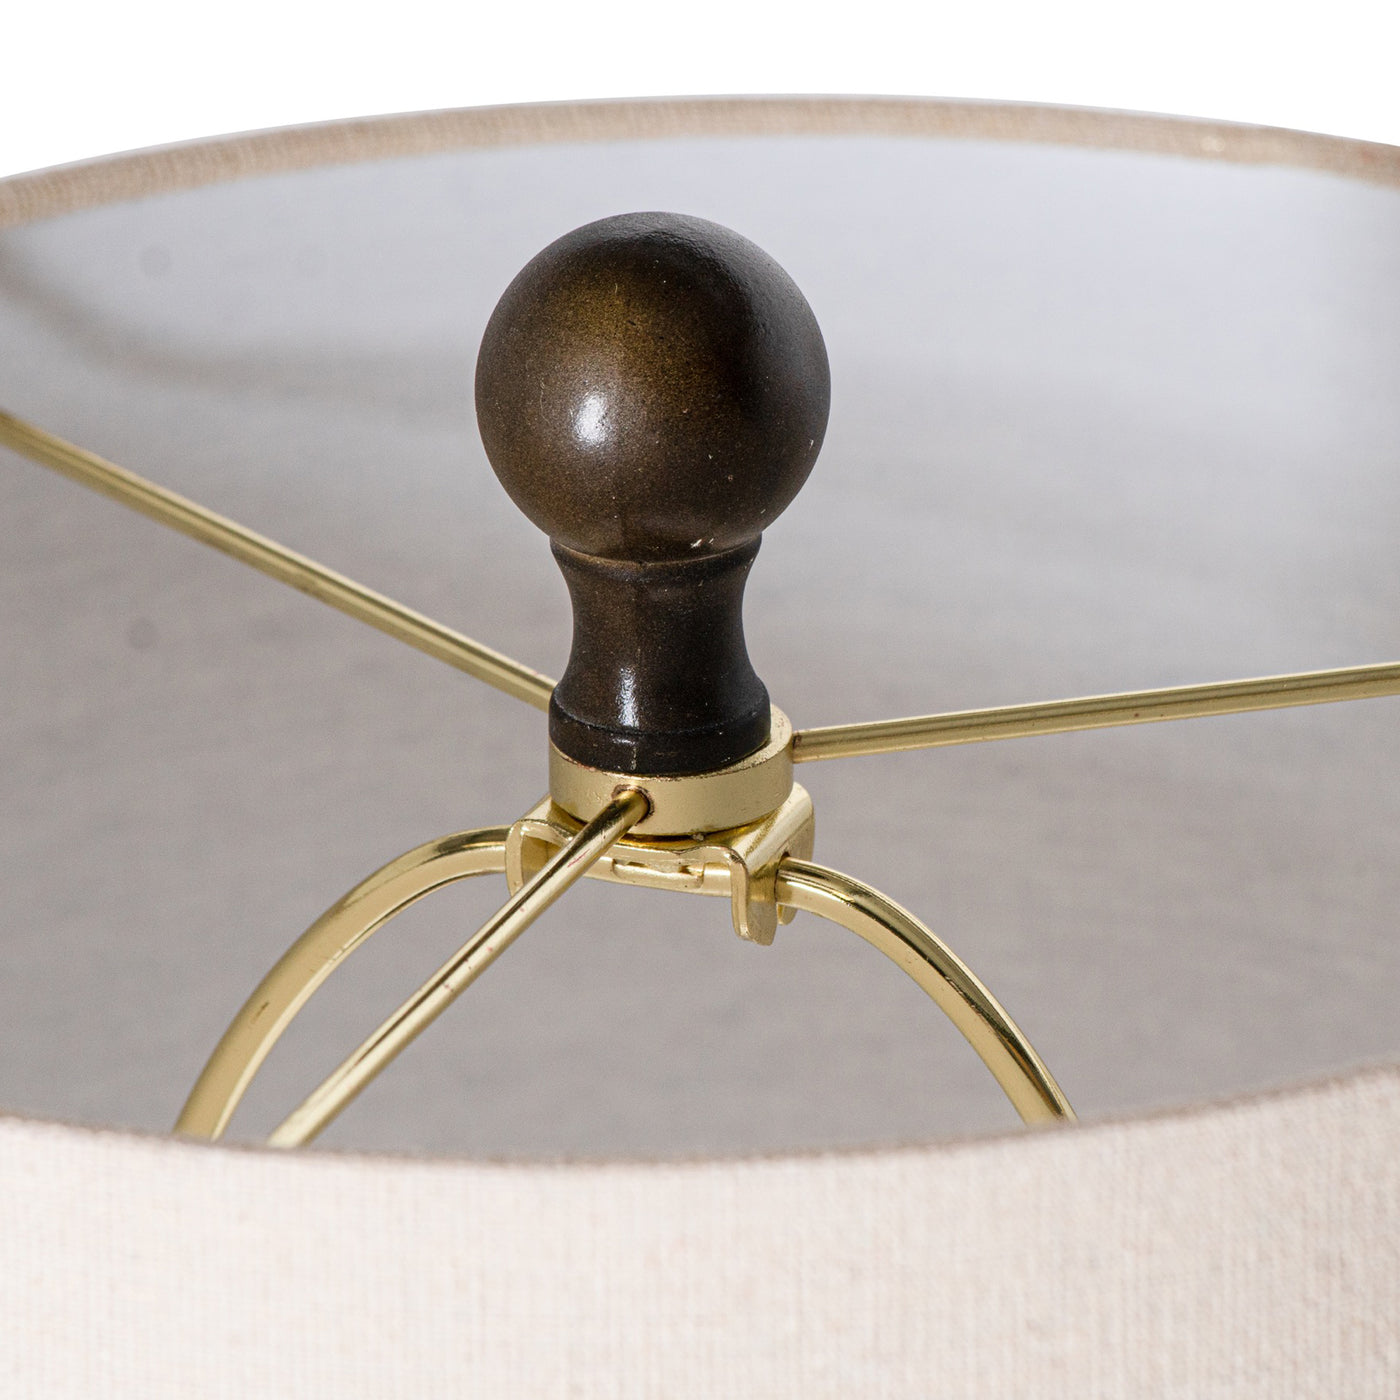 Nelson - Table Lamp Brown & Beige